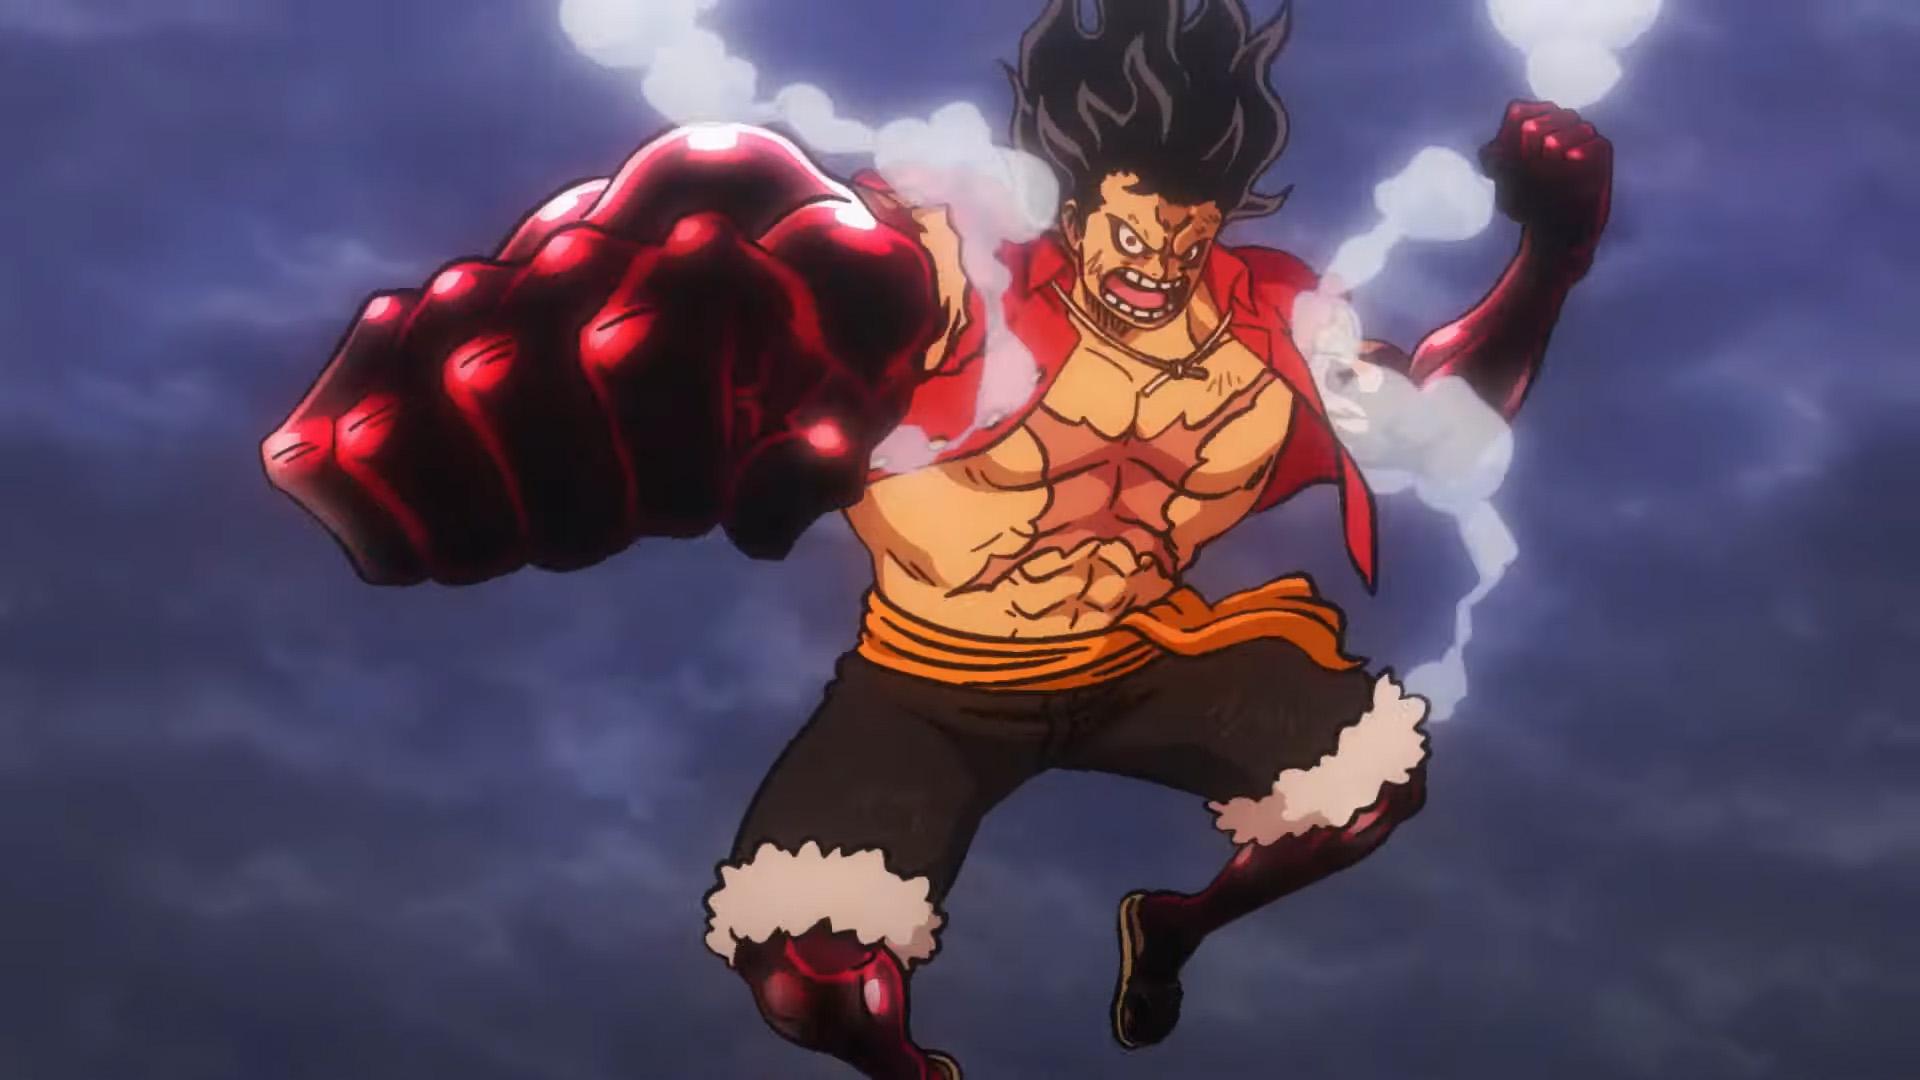 One Piece Stampede, Luffy forme une Dream team pour